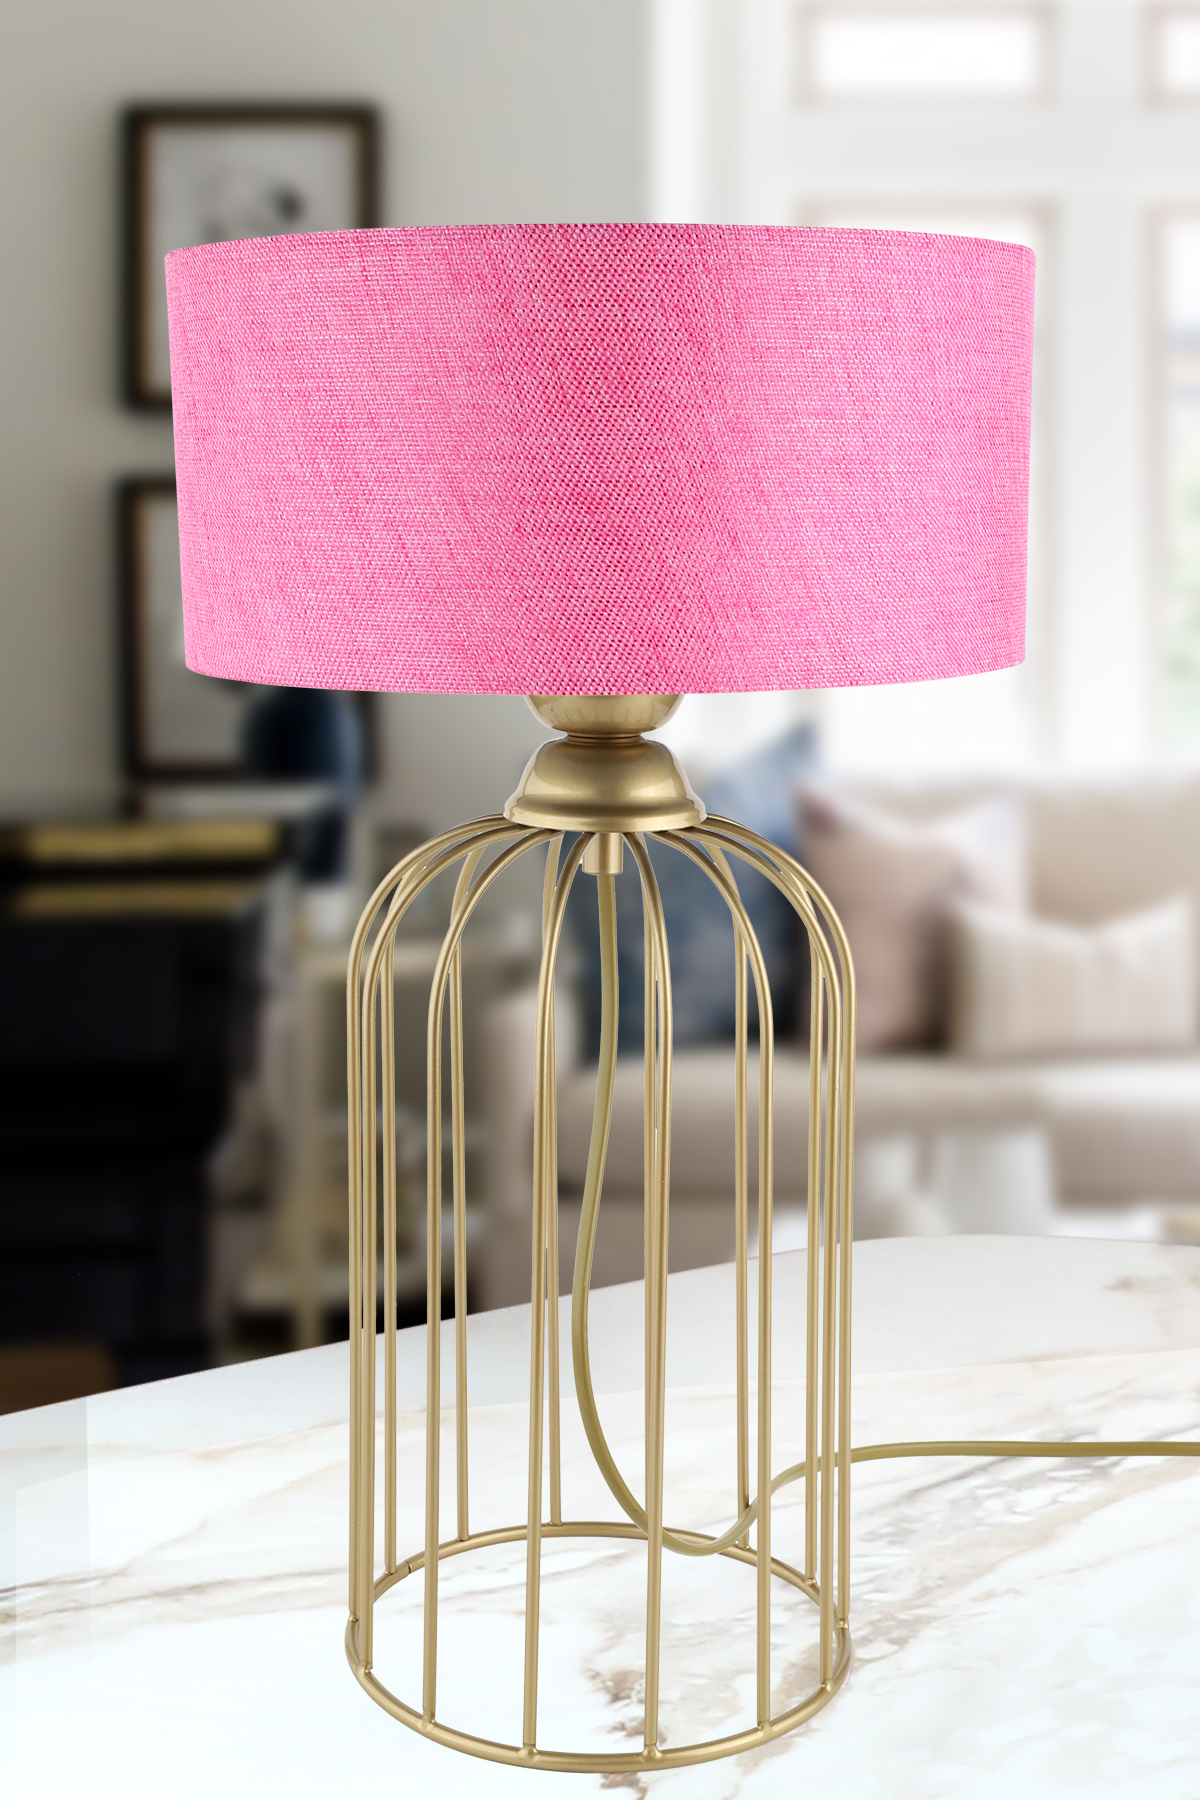 Tema Table lamp Antique,Pink